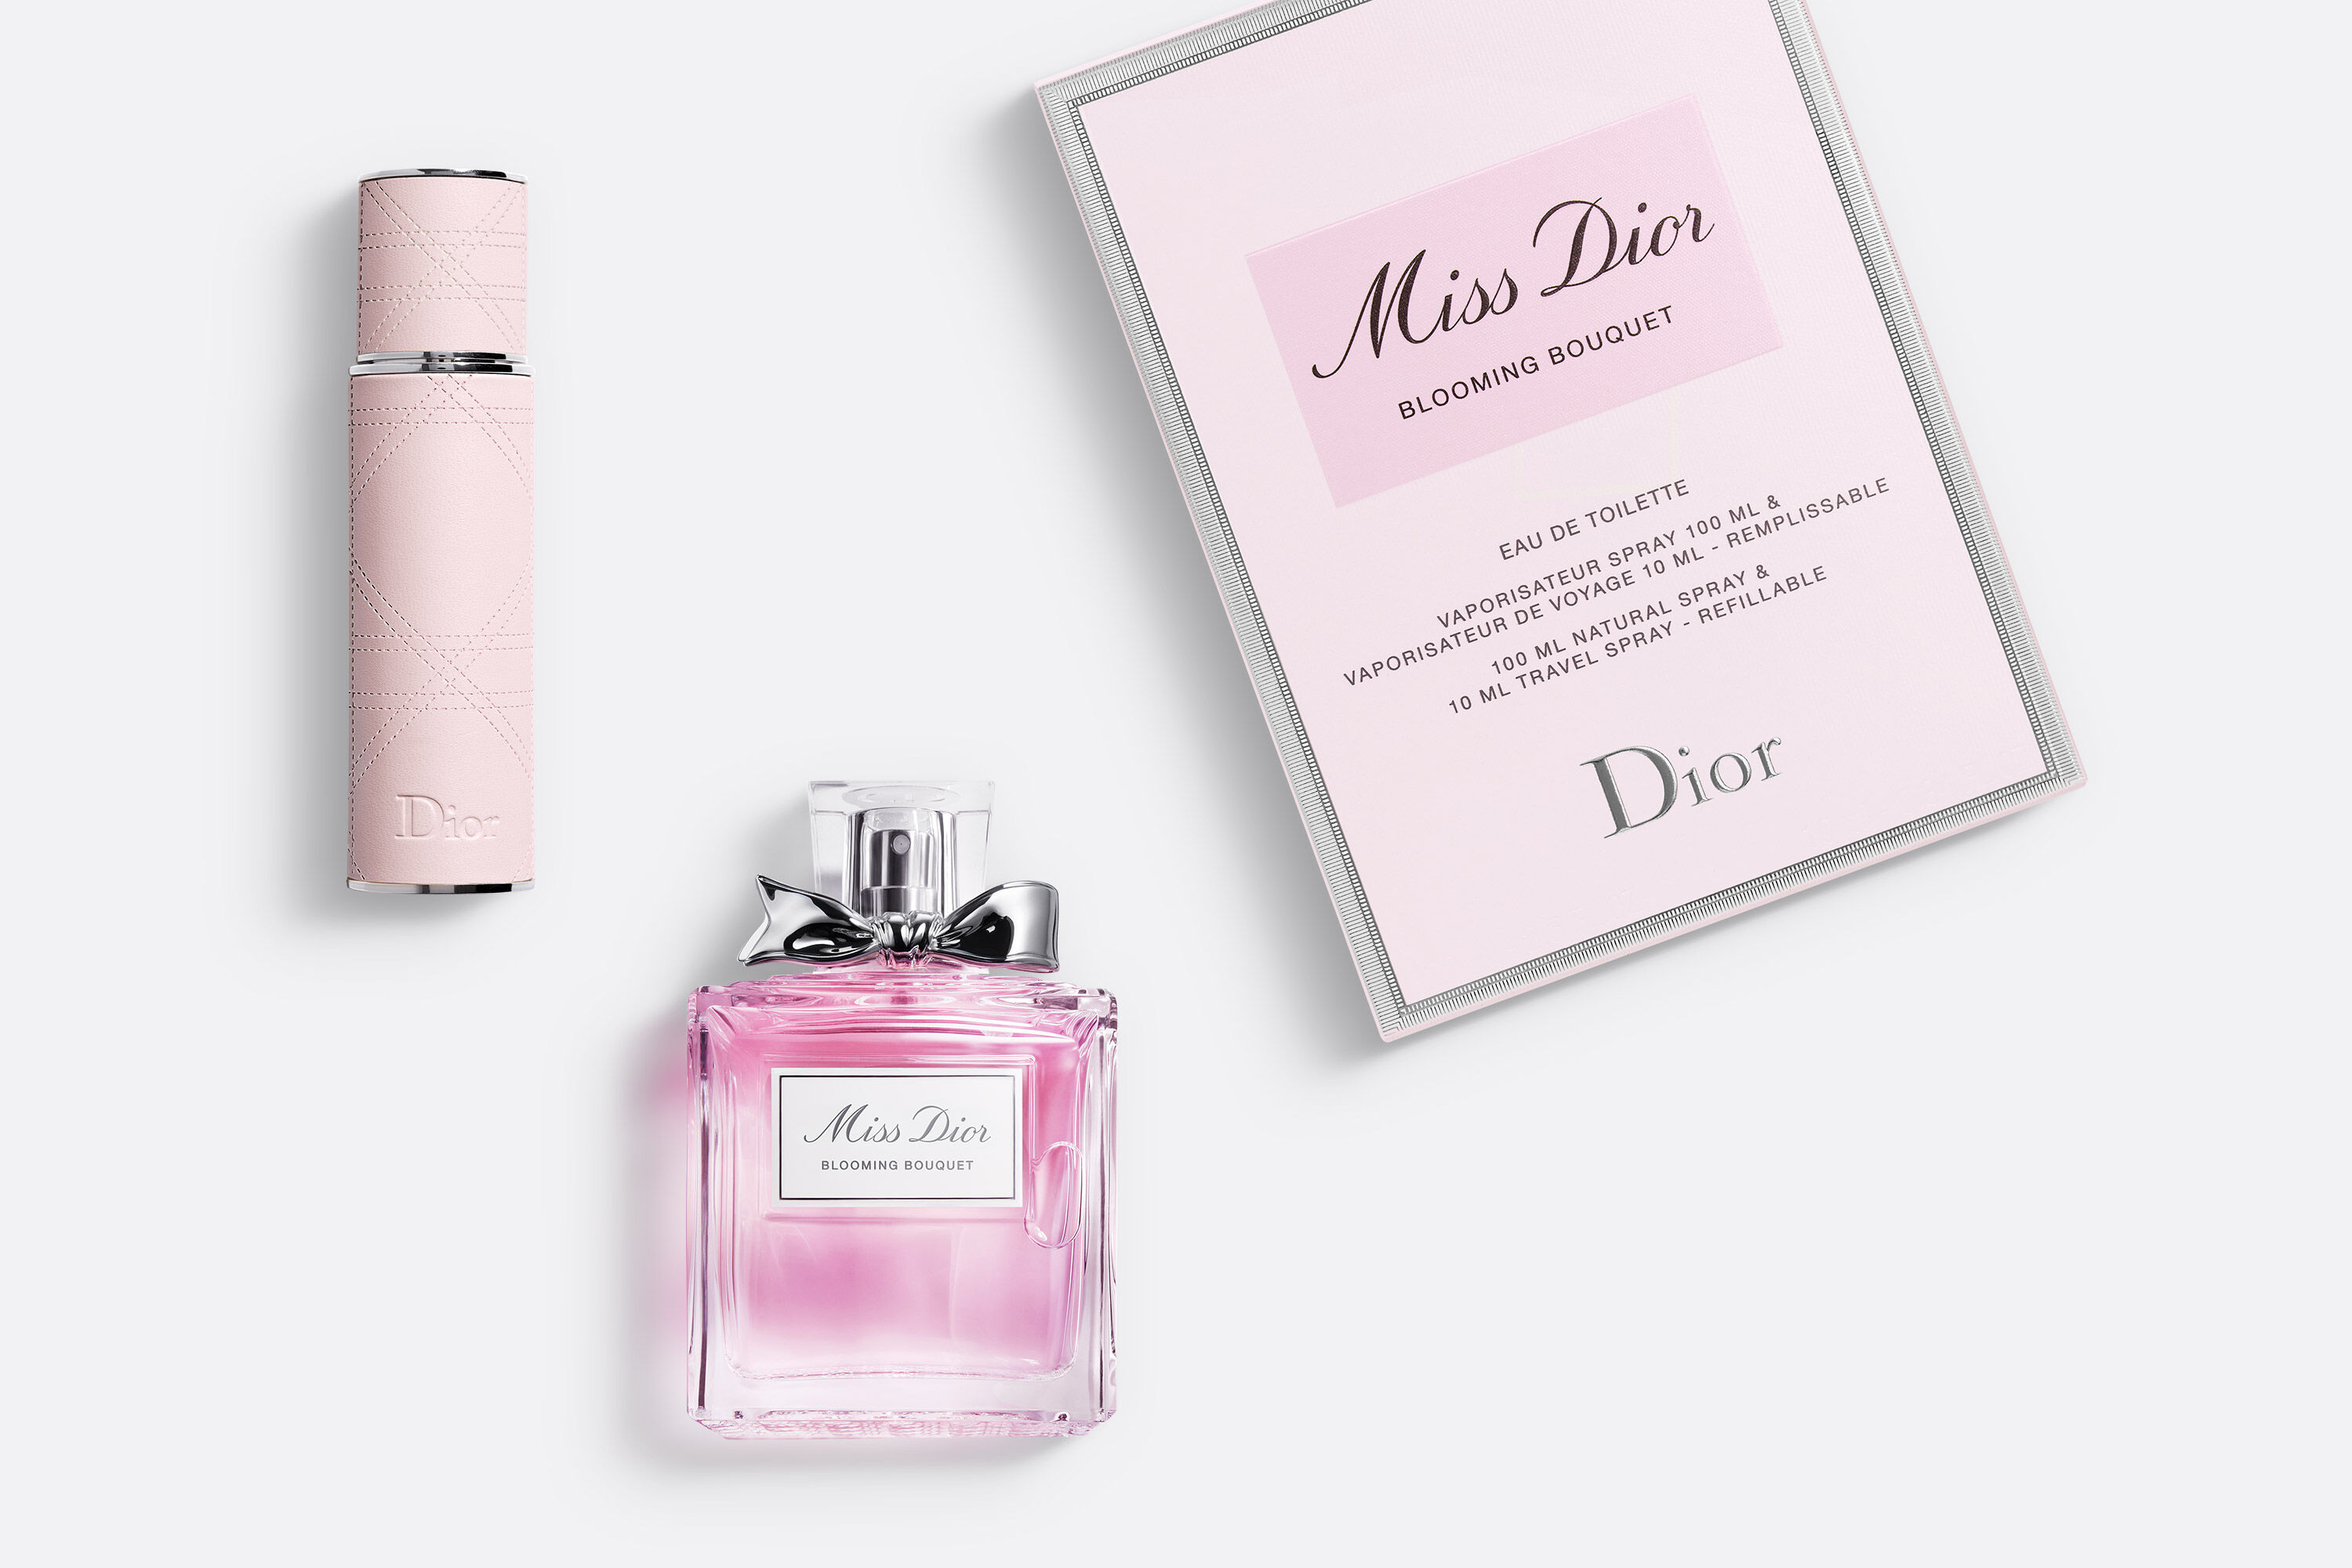 Miss Dior Blooming Bouquet: fragrance travel spray | DIOR